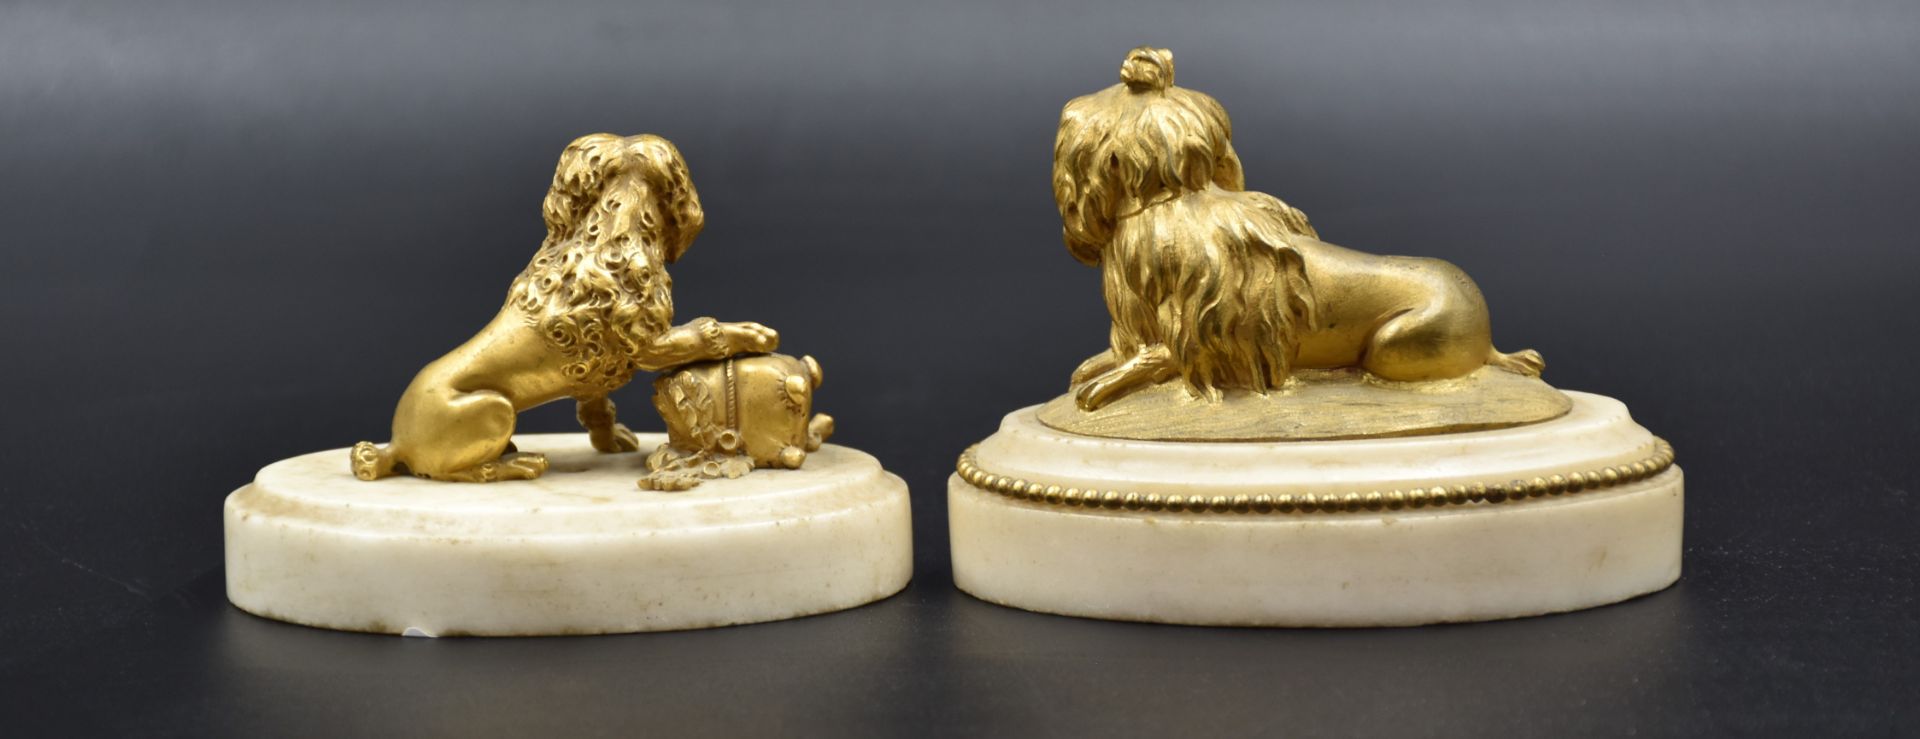 A pair of gilt bronze dogs on white marble bases. Late 18th century. One dog to be reattached. Total - Bild 2 aus 4